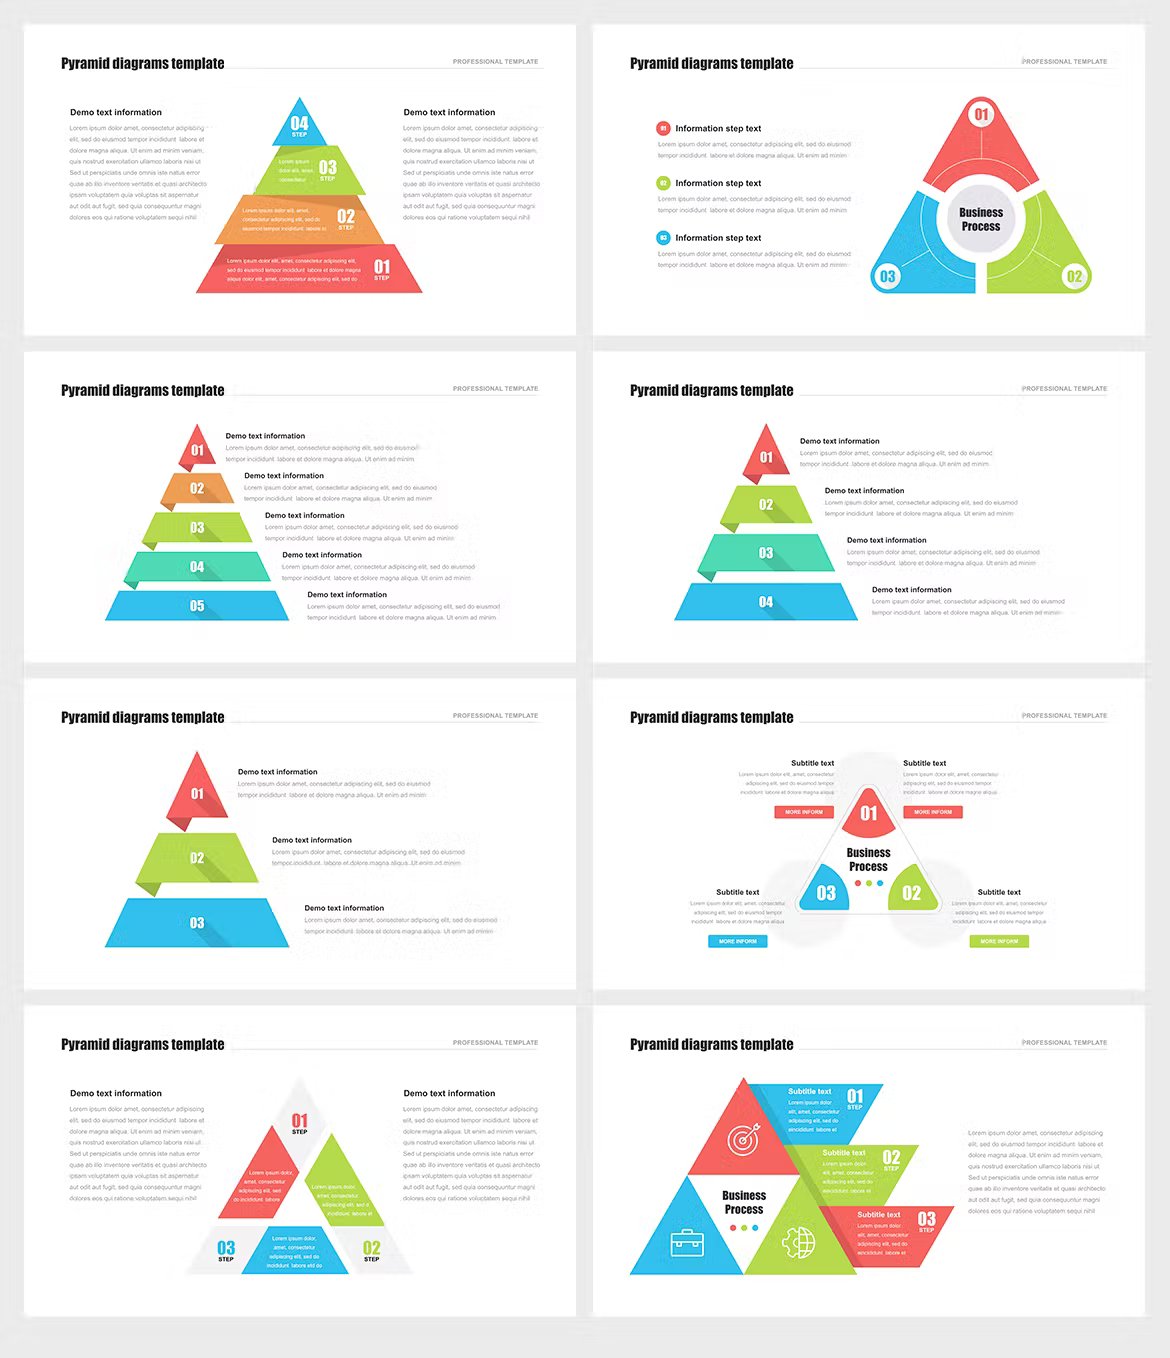 A set of 8 different pyramid infographic templates in black, white, blue, green and red on a gray background.